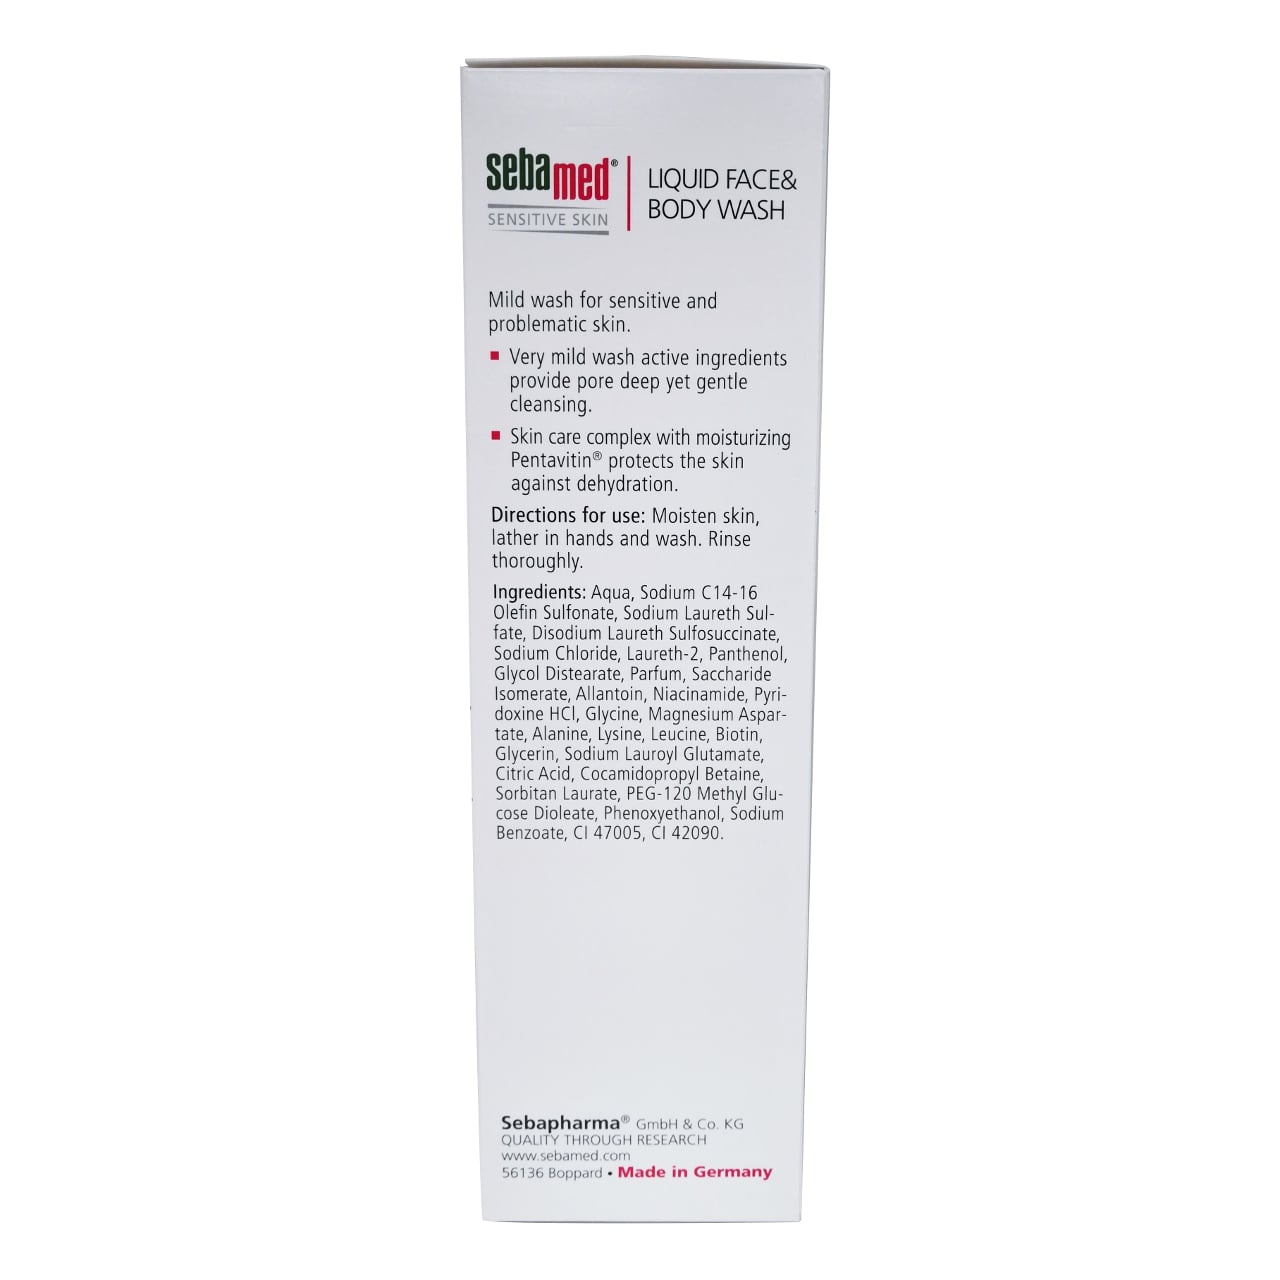 Product description, directions, and ingredients for Sebamed Liquid Face & Body Wash 1L